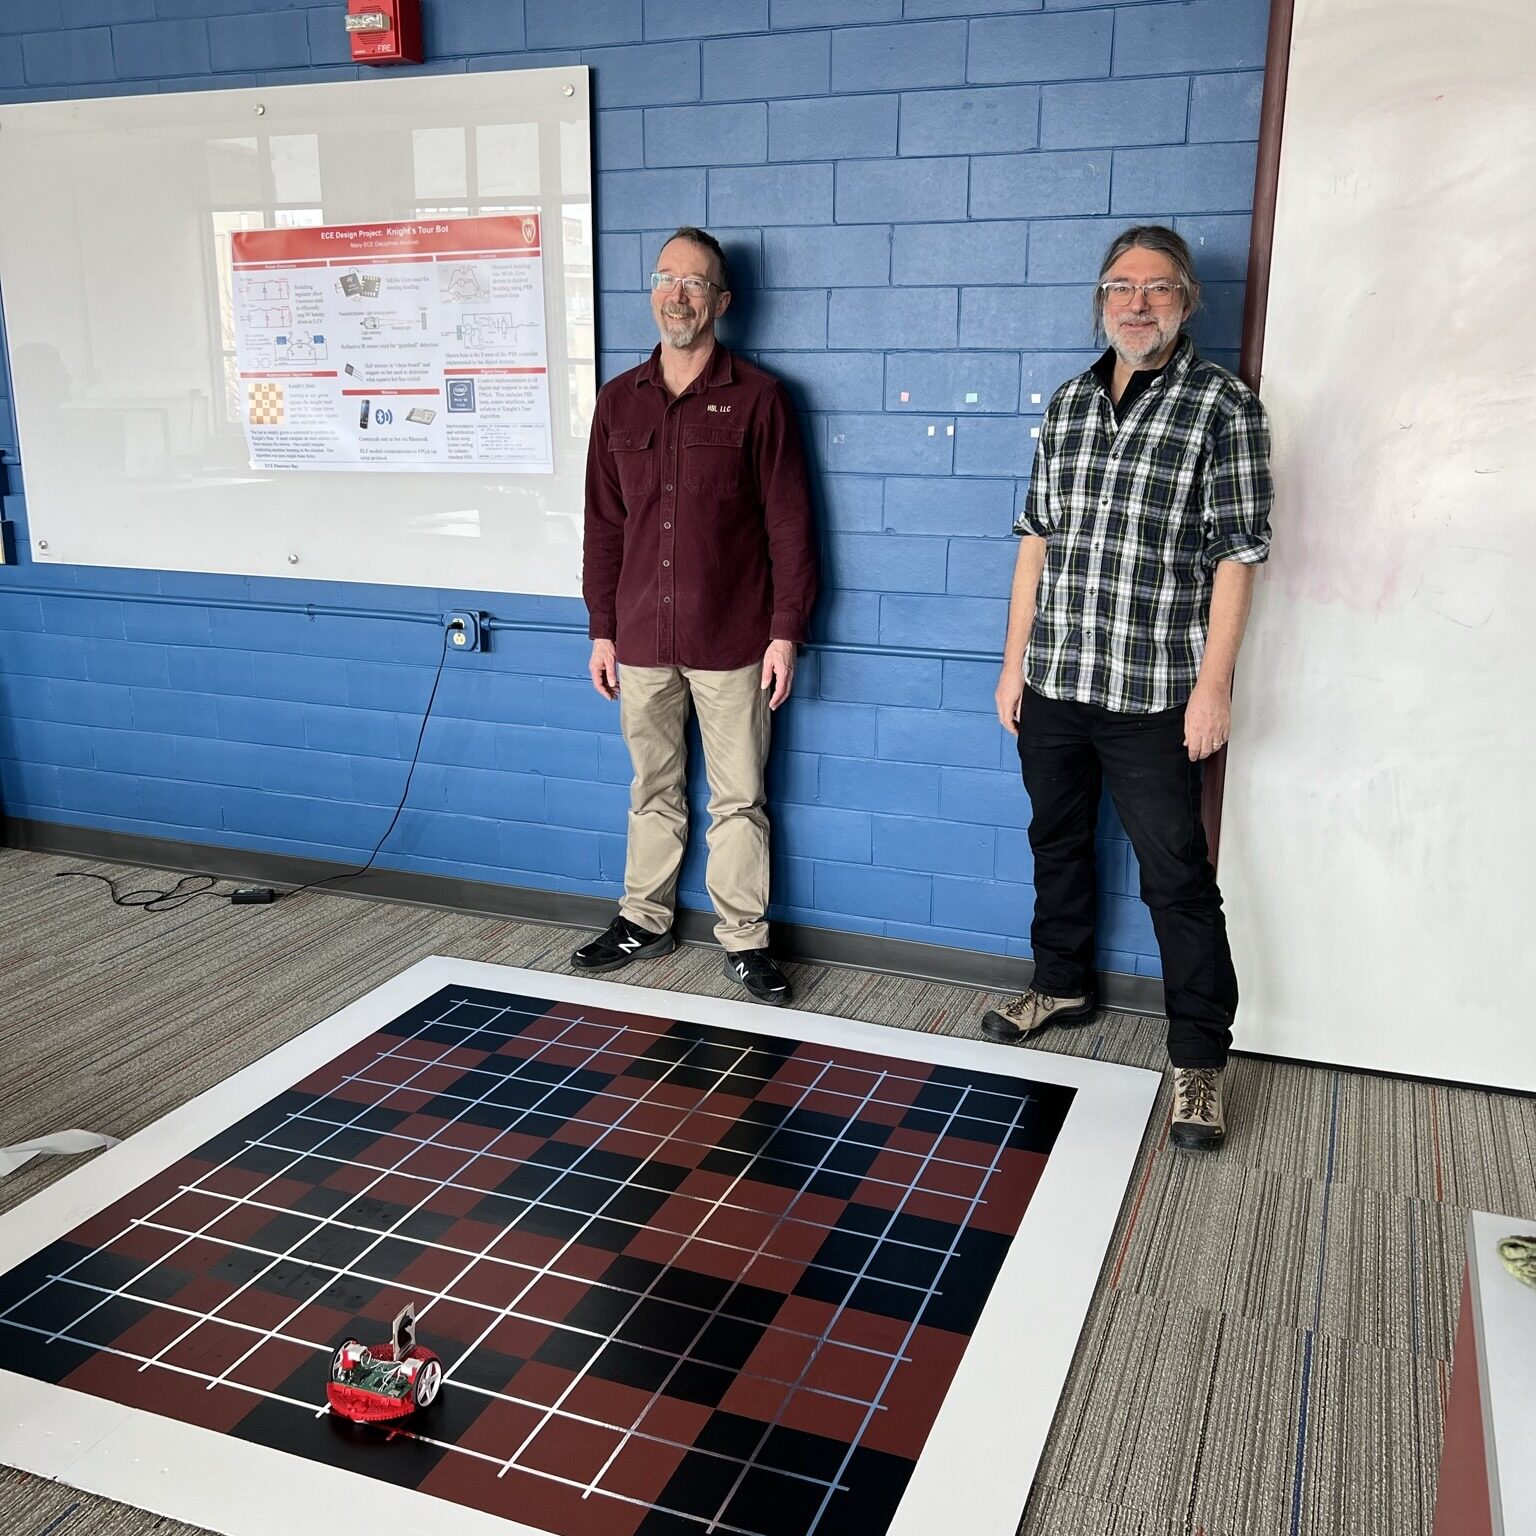 Eric Hoffman and Bill Sethares stand behind a chess board on the floor with small wheeled object on the board